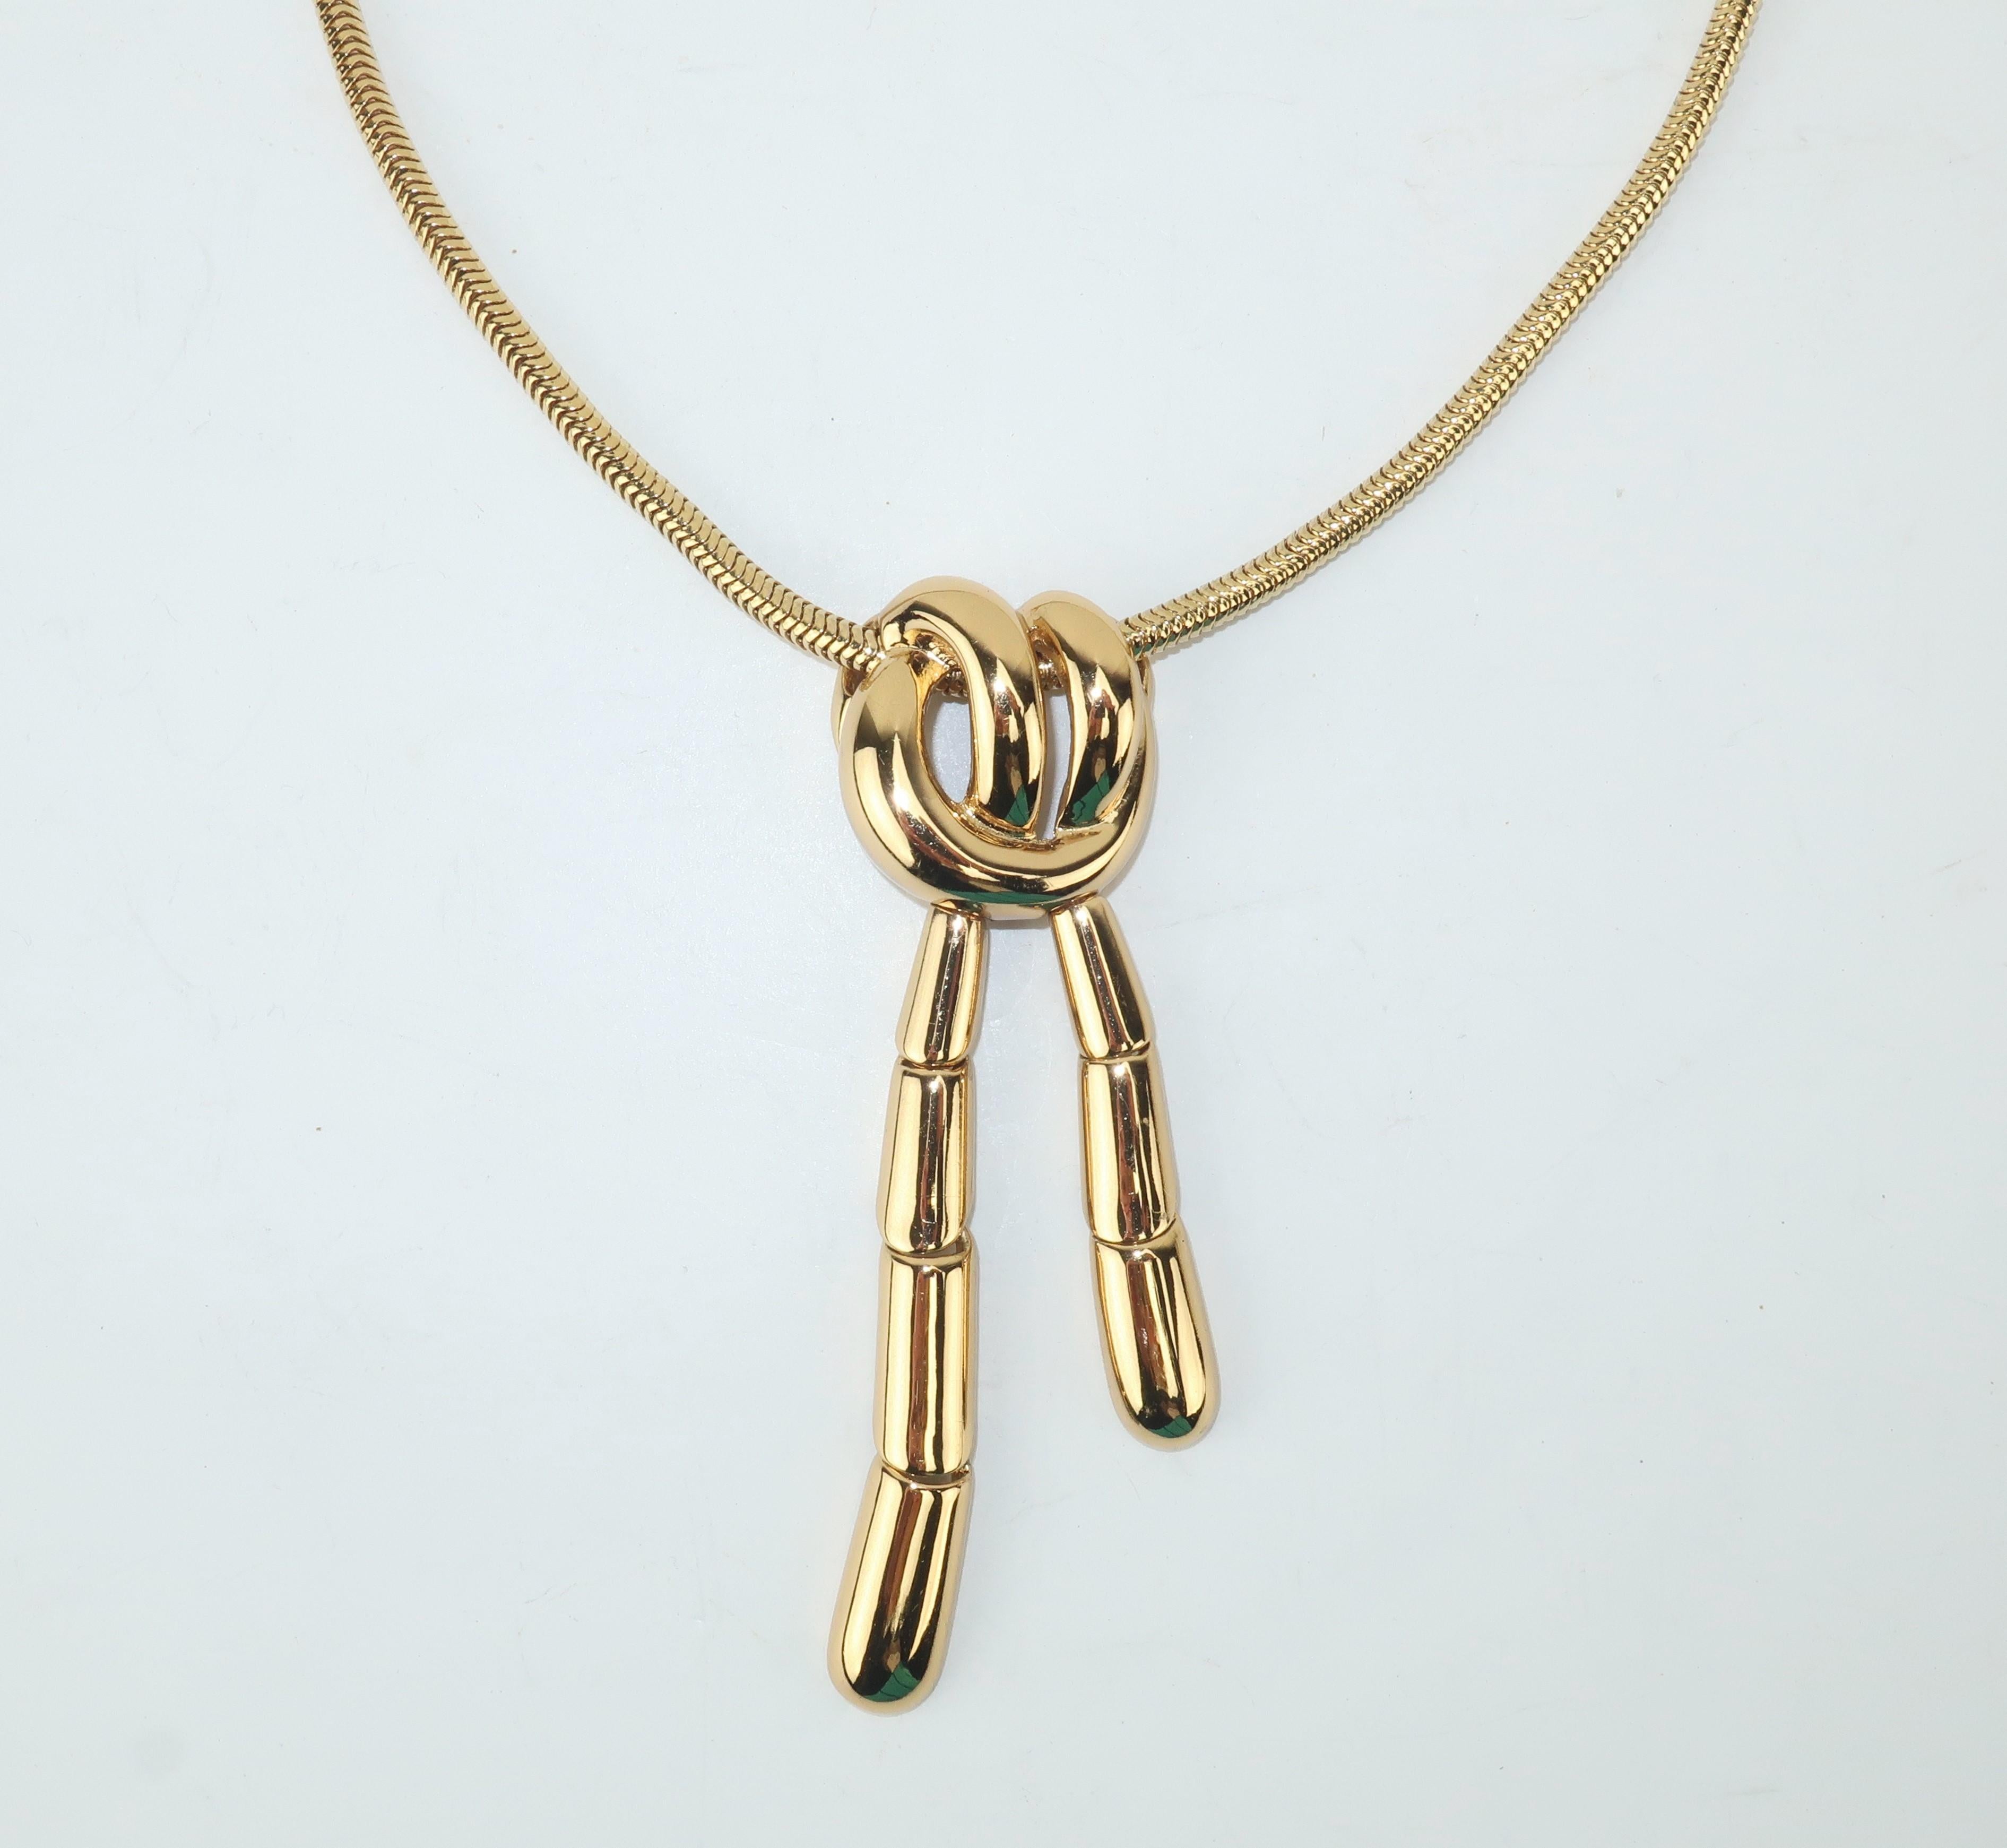 A close fitting Monet gold tone pendant necklace featuring a faux knot created from articulated segments.  The knot is suspended from a serpentine chain outfitted with a clamp closure and the design offers a unique fluidity that is subtly